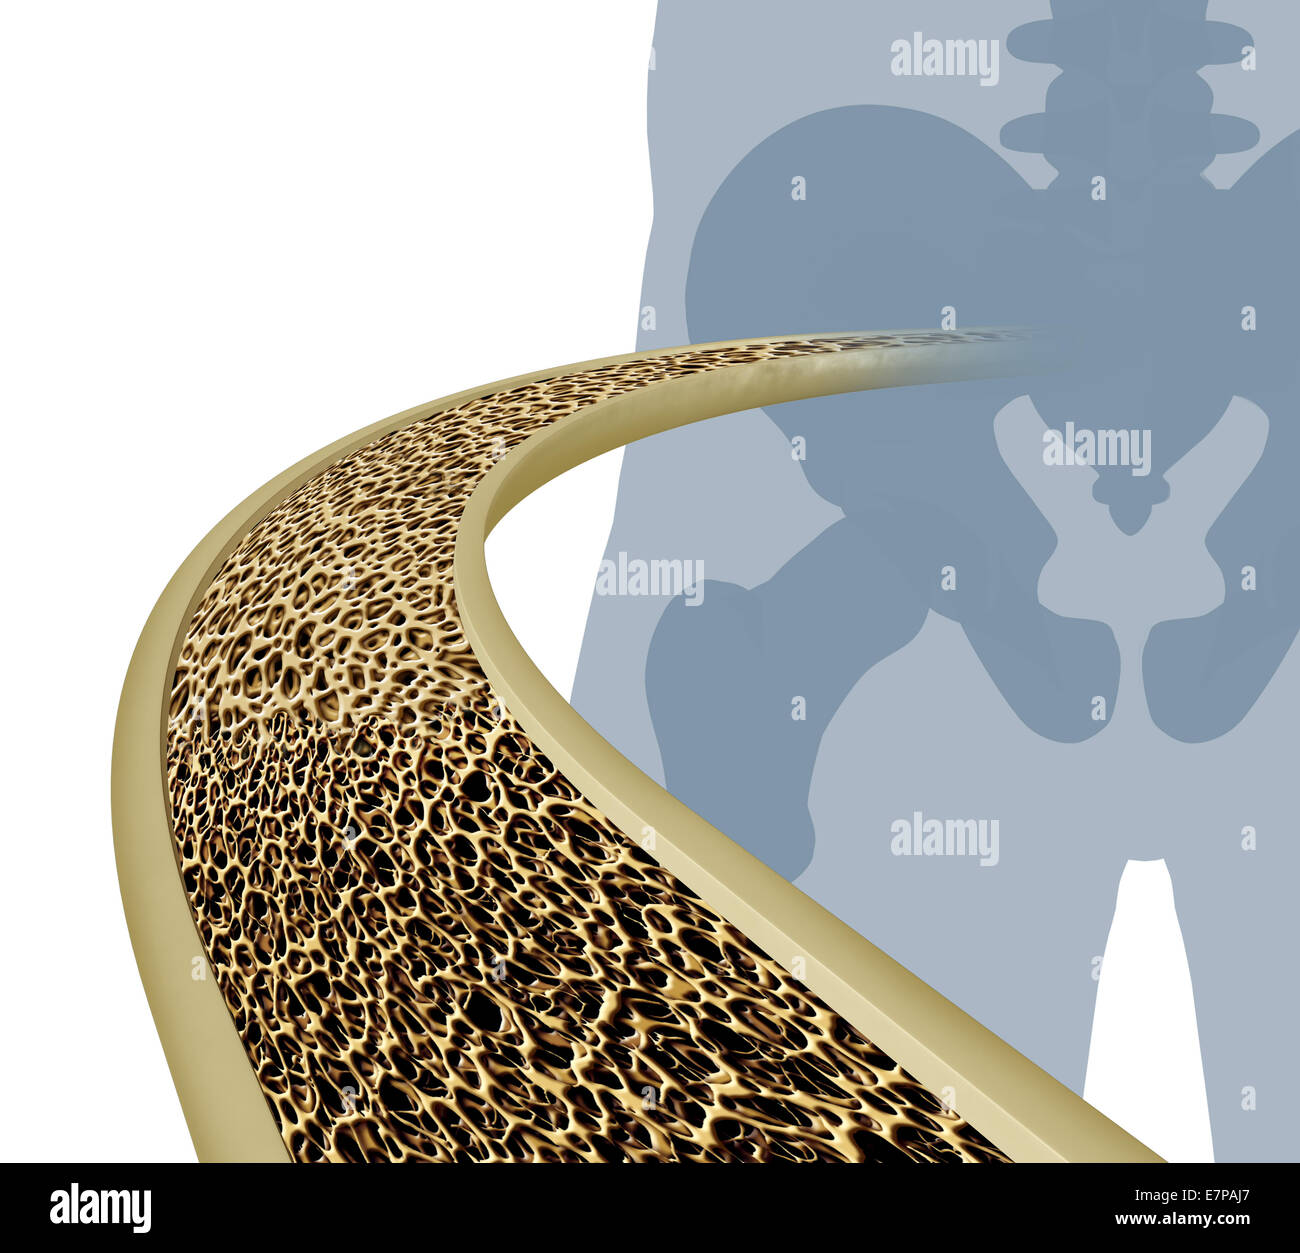 Osteoporosis medical illustration concept as a close up diagram of the inside of a human bone from a skeletal hip joint as a normal healthy condition gradually degrades to abnormal unhealthy bone mass on a white background. Stock Photo